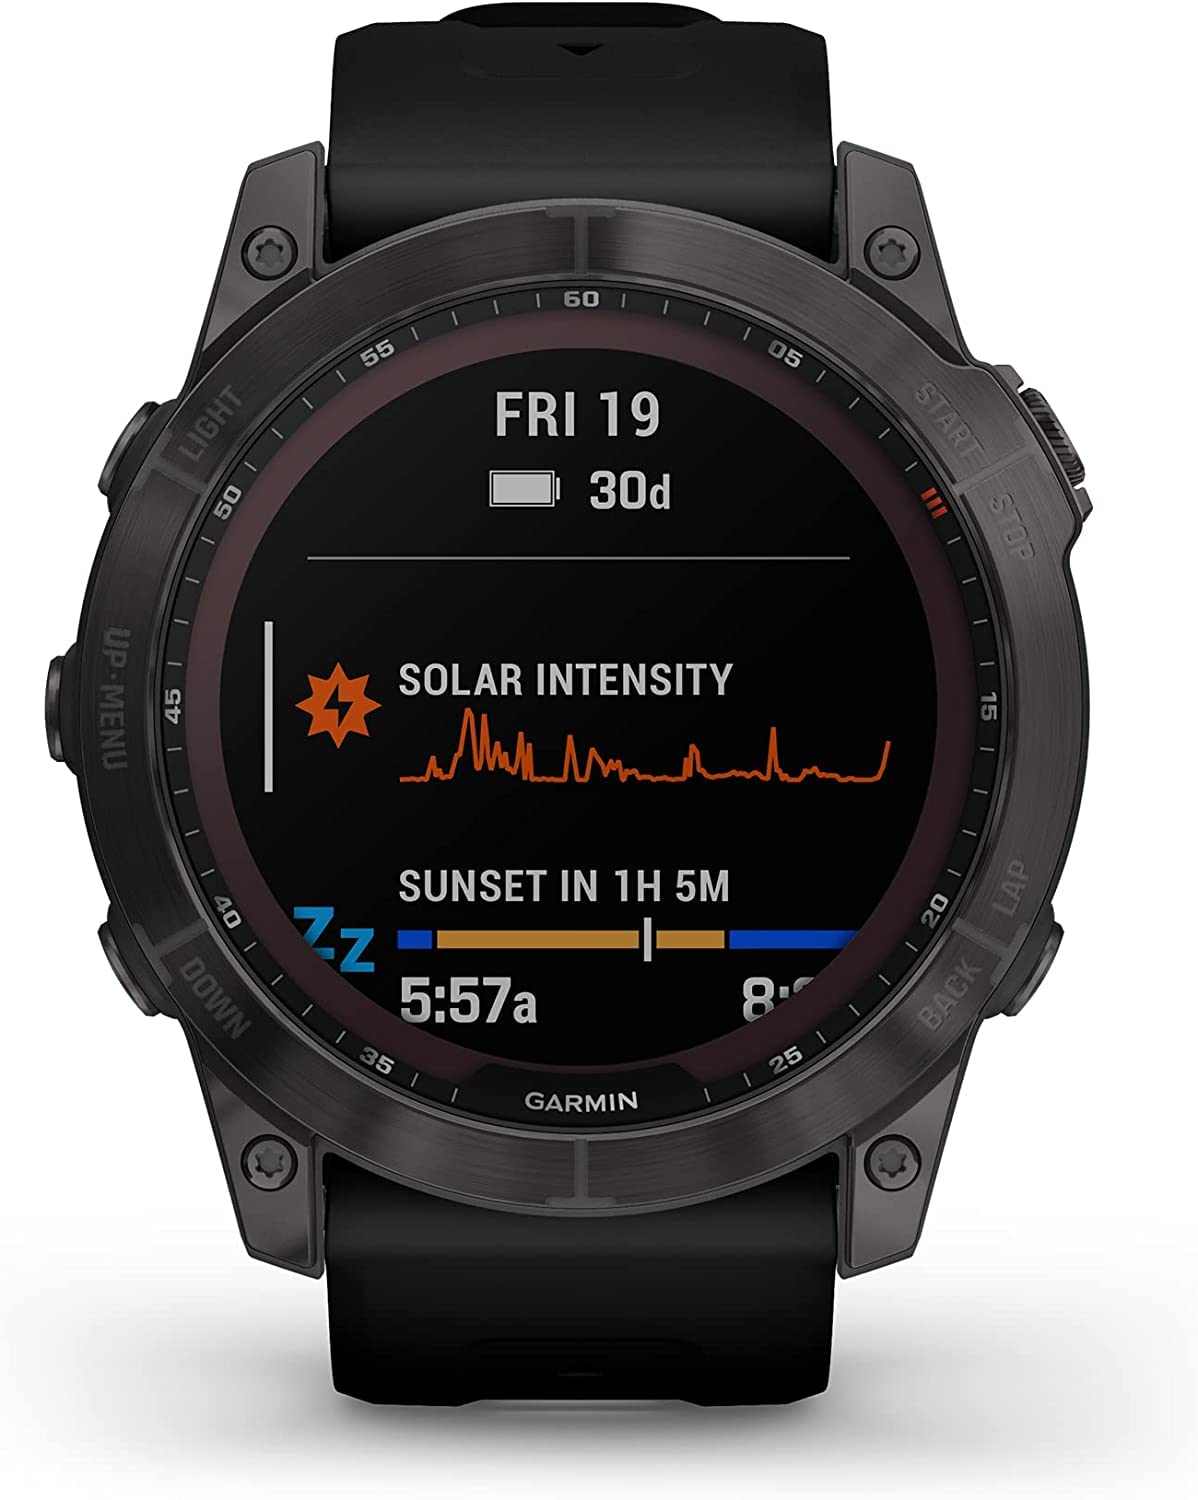 Lumintrail Garmin Fenix 7X Sapphire Solar Edition Smart Watch, Large 51 MM Adventure Smartwatch, Rugged Outdoor Watch with GPS, Touchscreen, Carbon Gray DLC Titanium with Black Band, with a Wall Plug